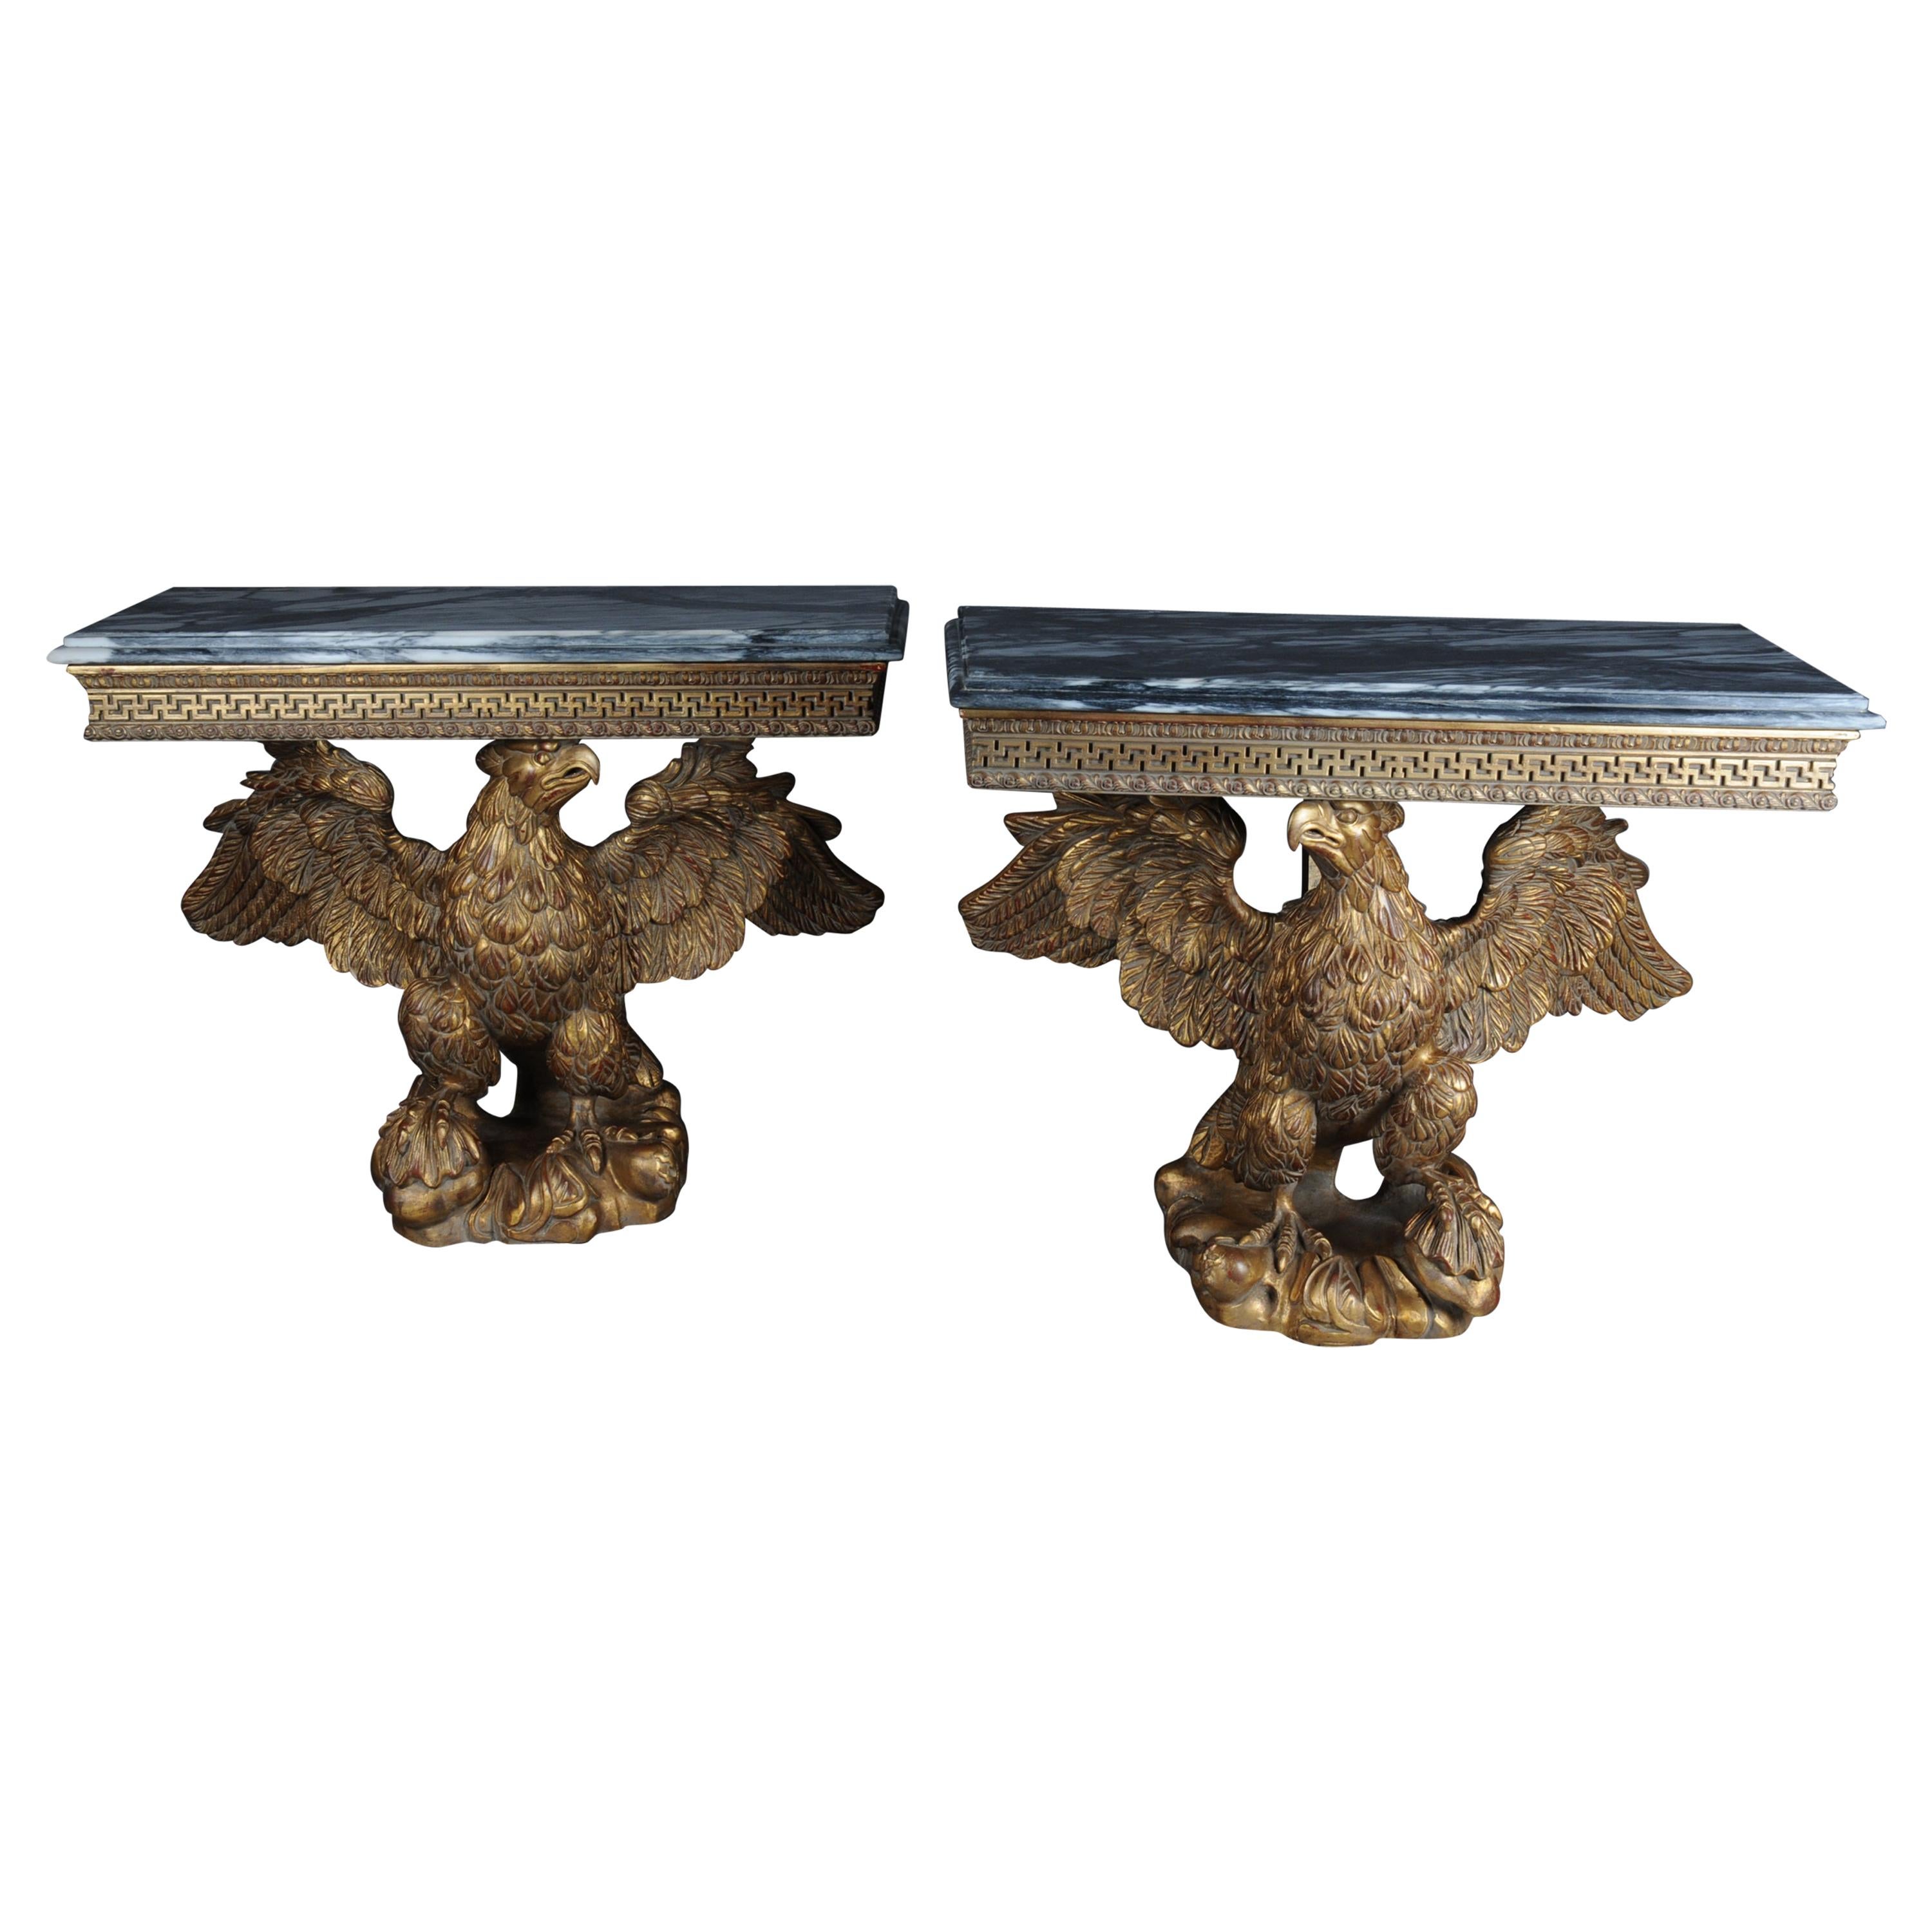 Pair of Magnificent Eagle Consoles Designed by William Kent For Sale